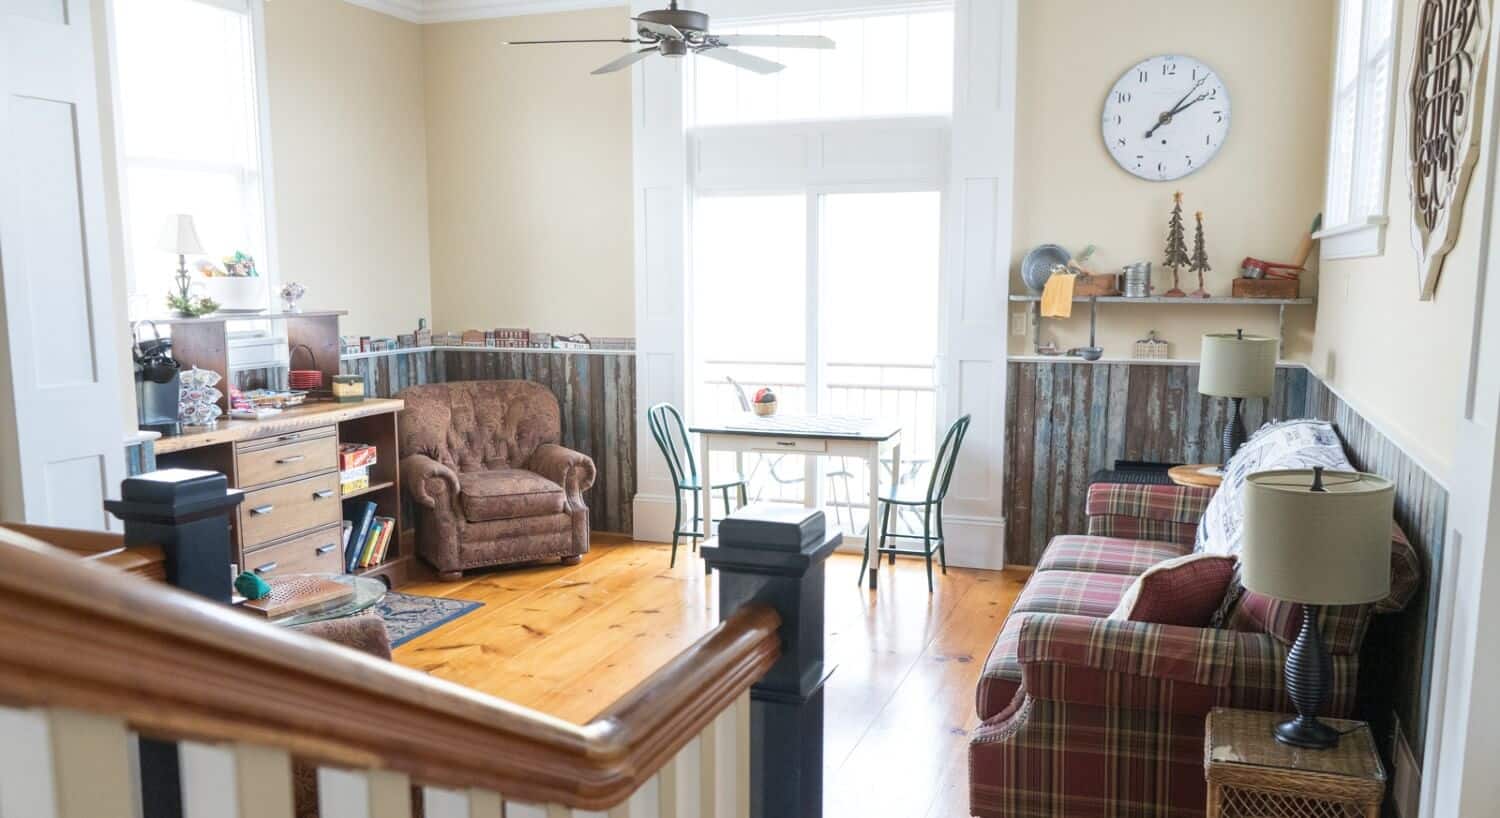 Living room area with couch, two chairs, dresser with games and sliding glass doors onto an outside patio